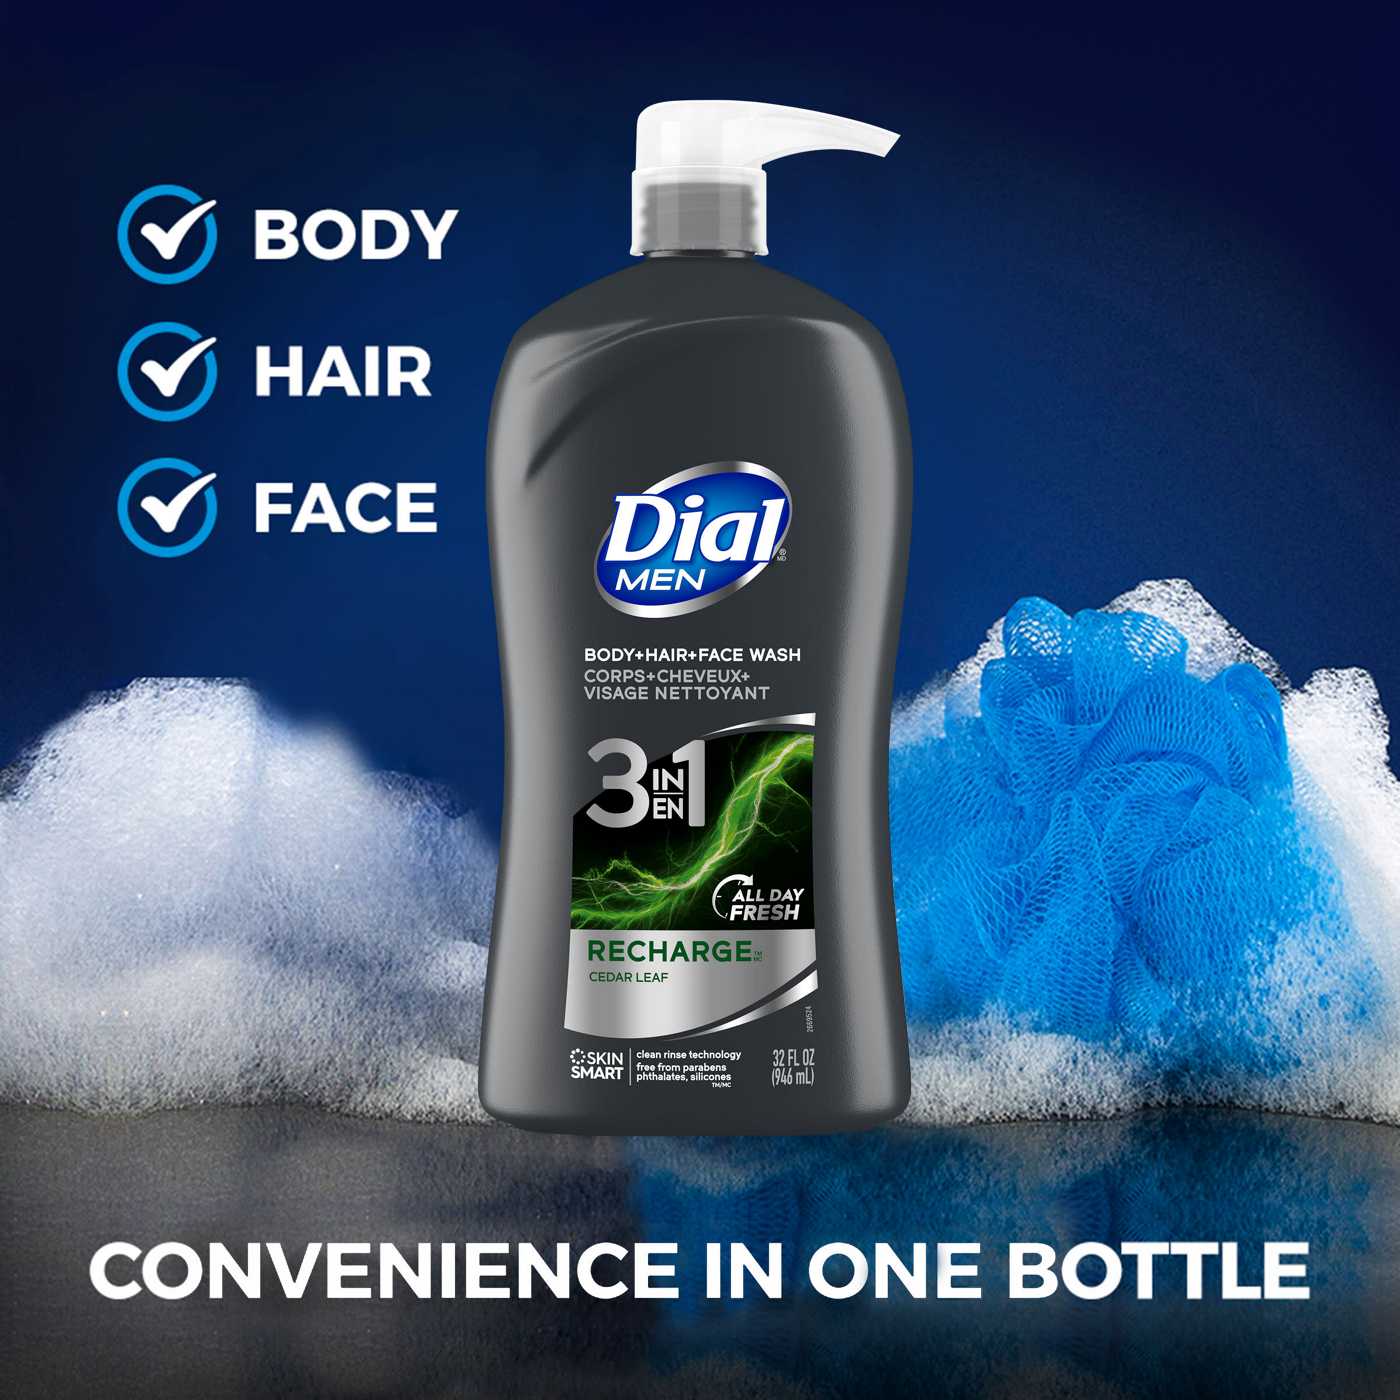 Dial Men 3in1 Body, Hair and Face Wash - Recharge; image 2 of 6